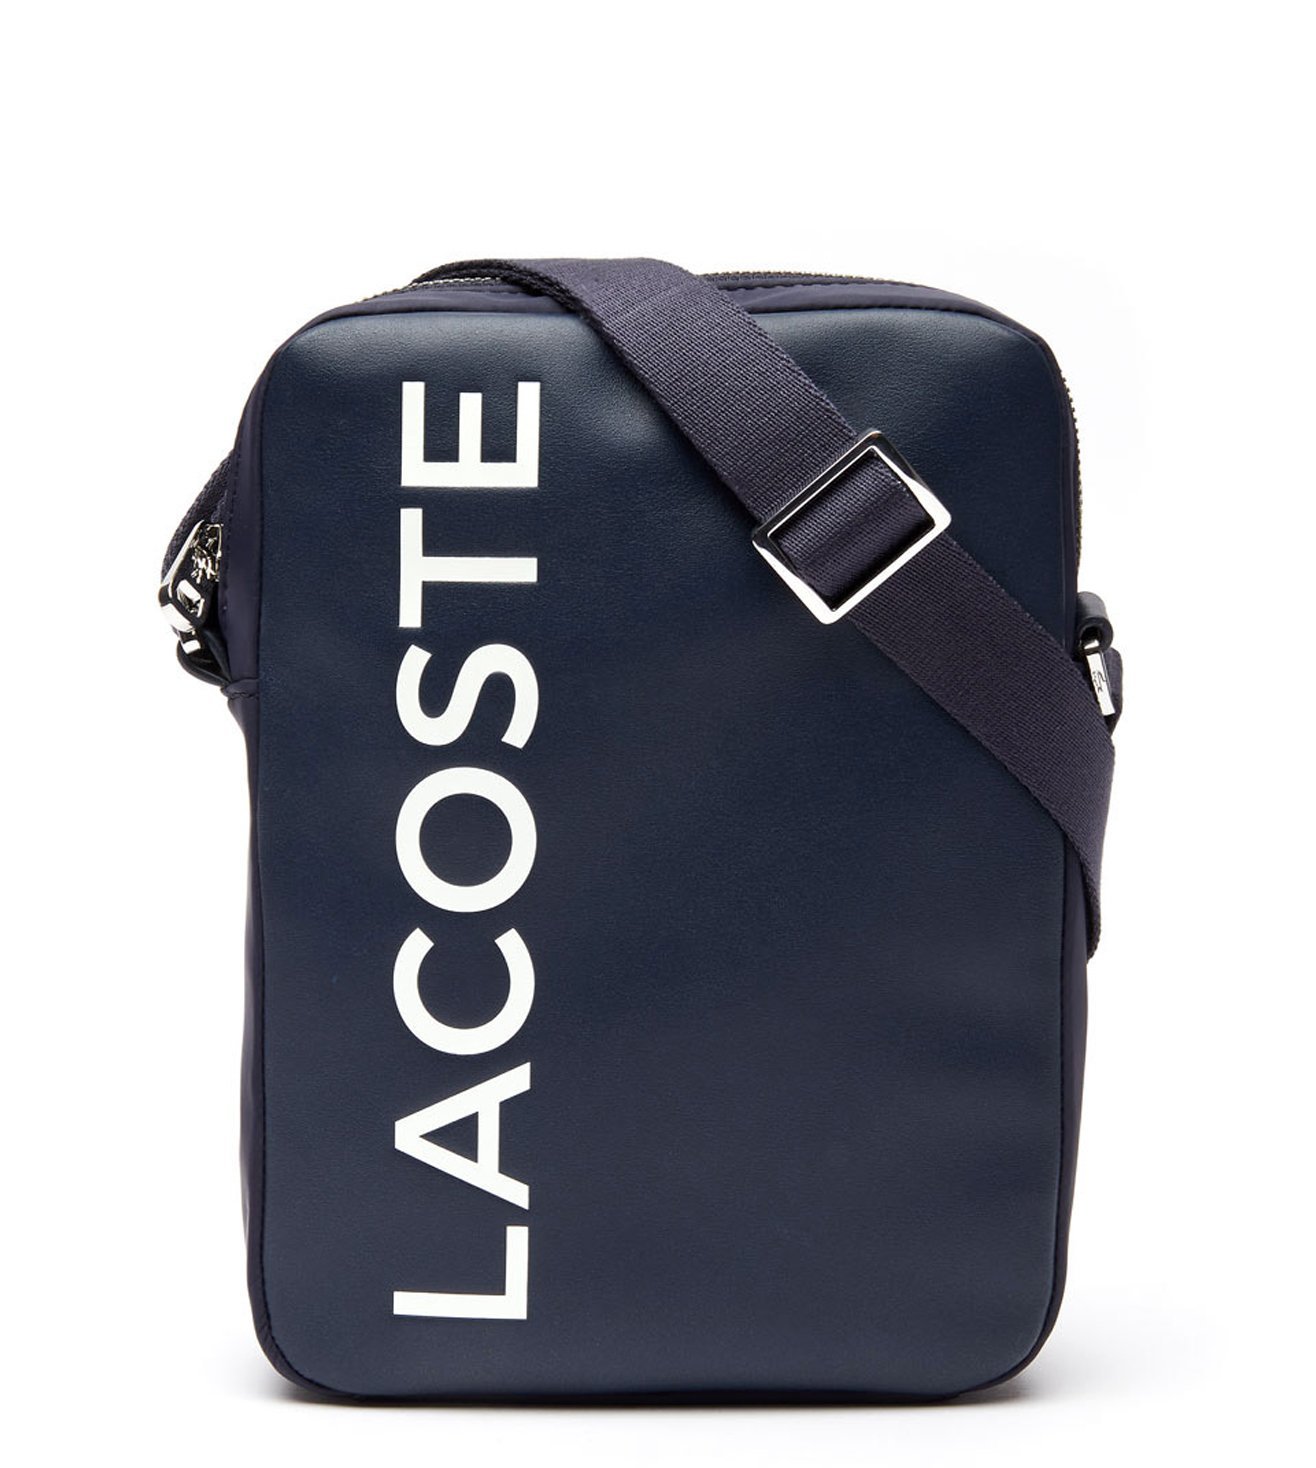 lacoste navy bag